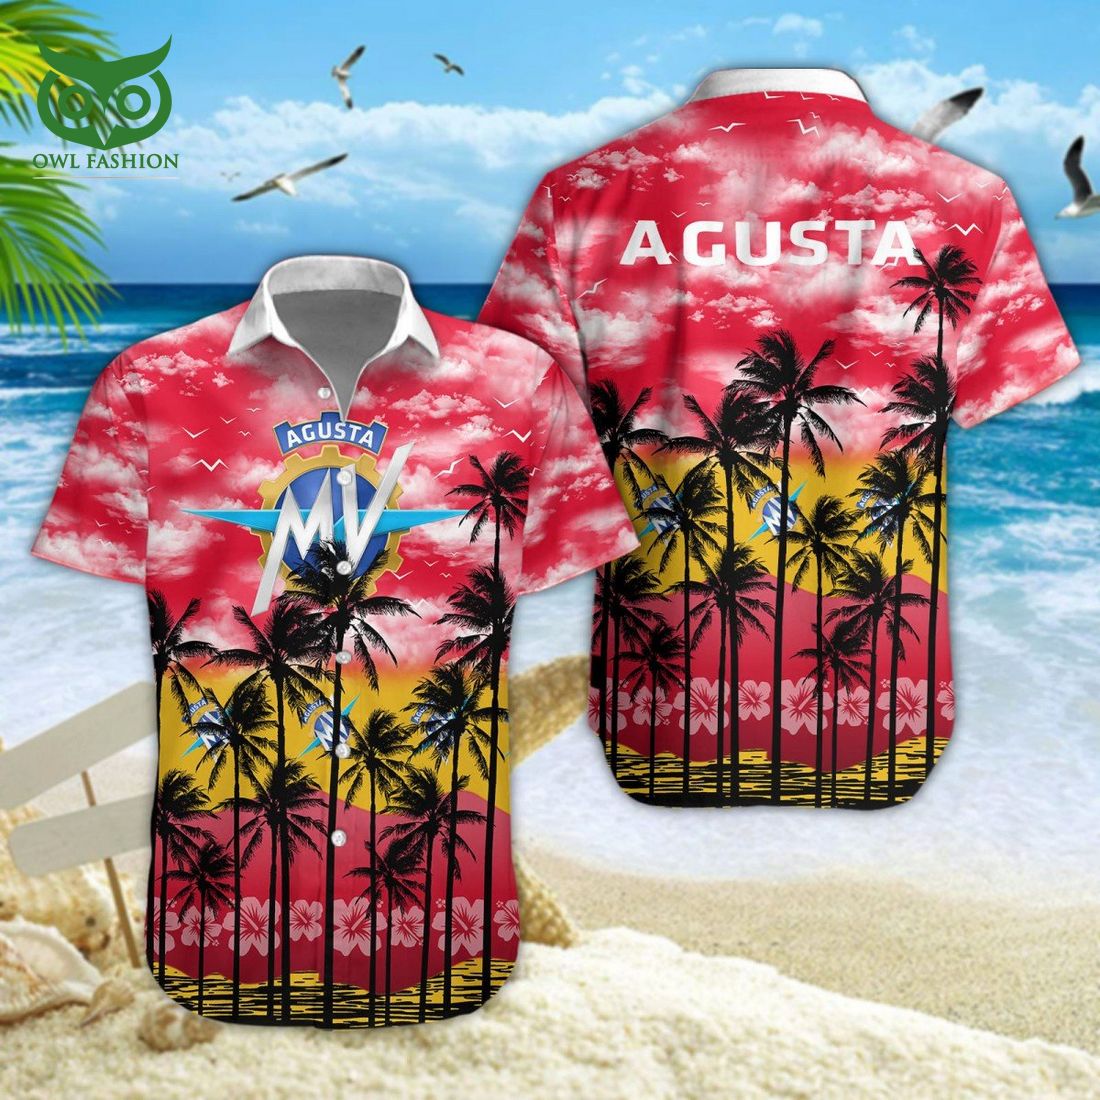 MV Agusta Car Hawaiian Shirt Short This is awesome and unique